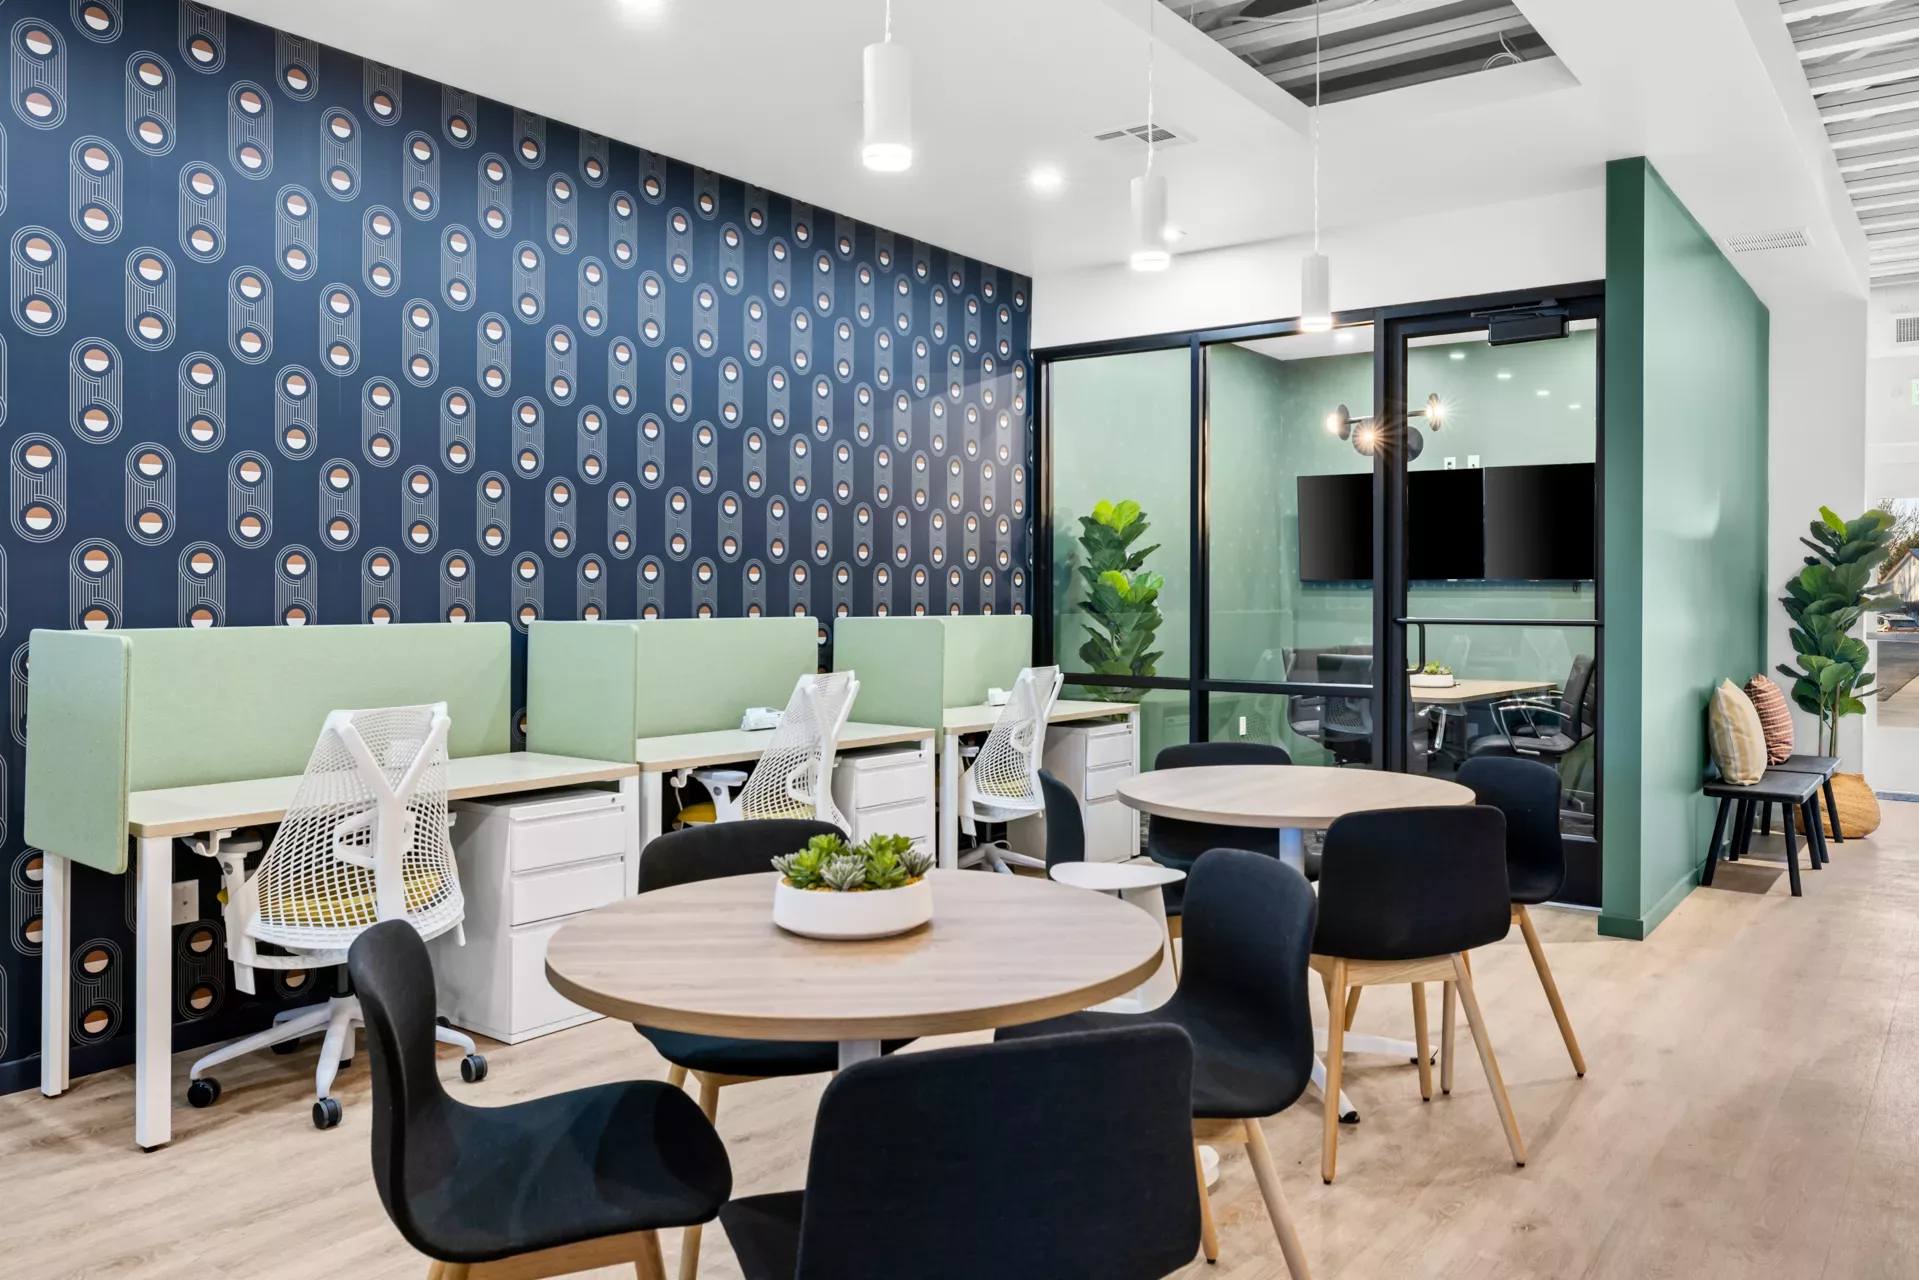 Open coworking office space with desks and chairs